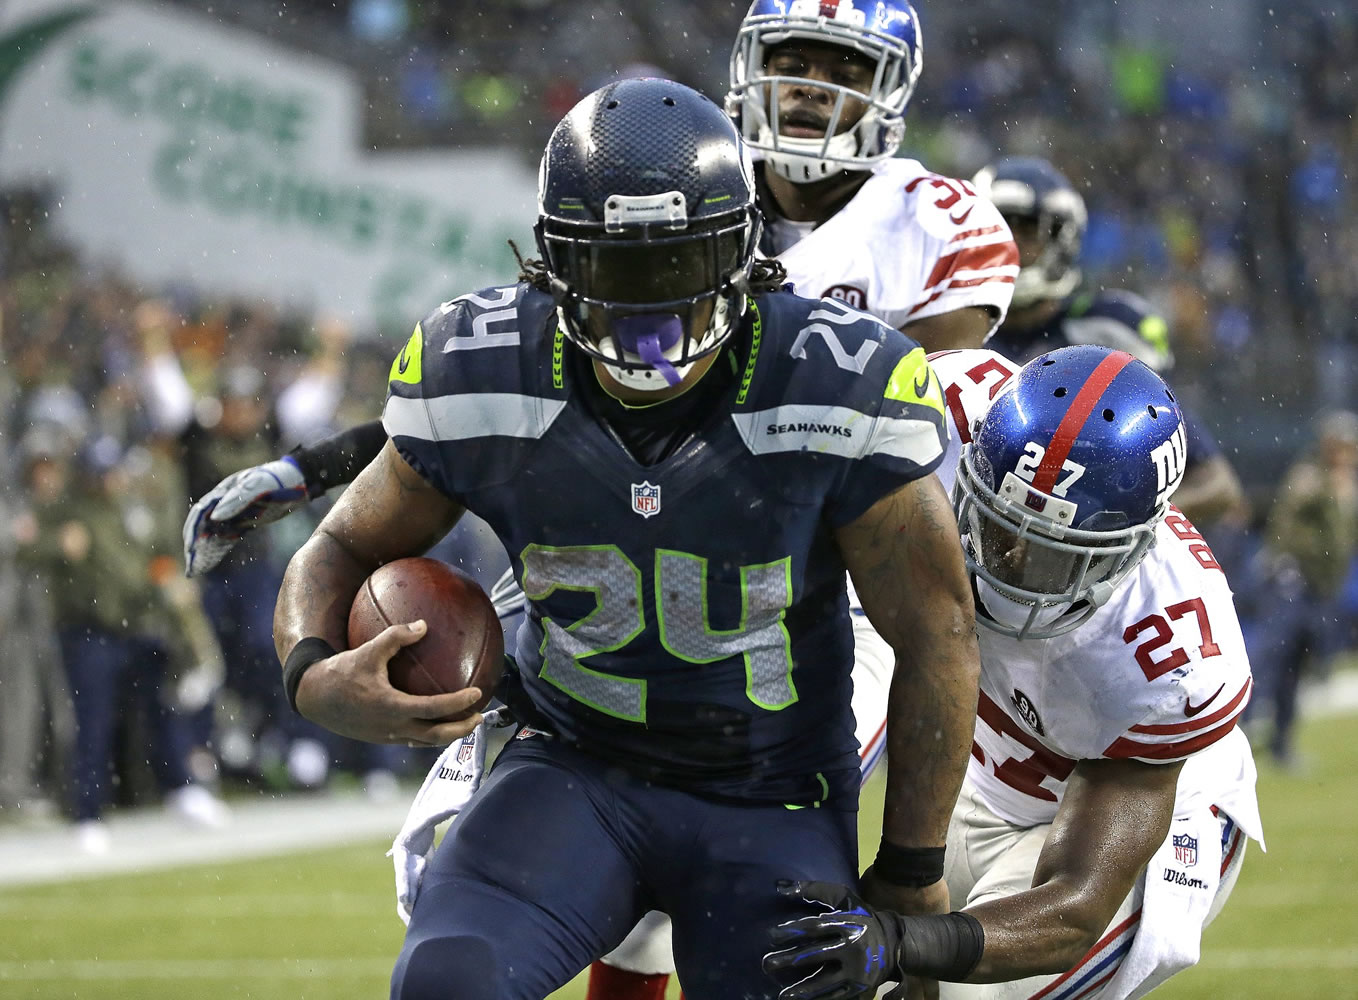 Seattle Seahawks running back Marshawn Lynch (24) scores his fourth touchdown against the New York Giants, as Giants' Stevie Brown (27) attempts the tackle in the second half, Sunday, Nov.